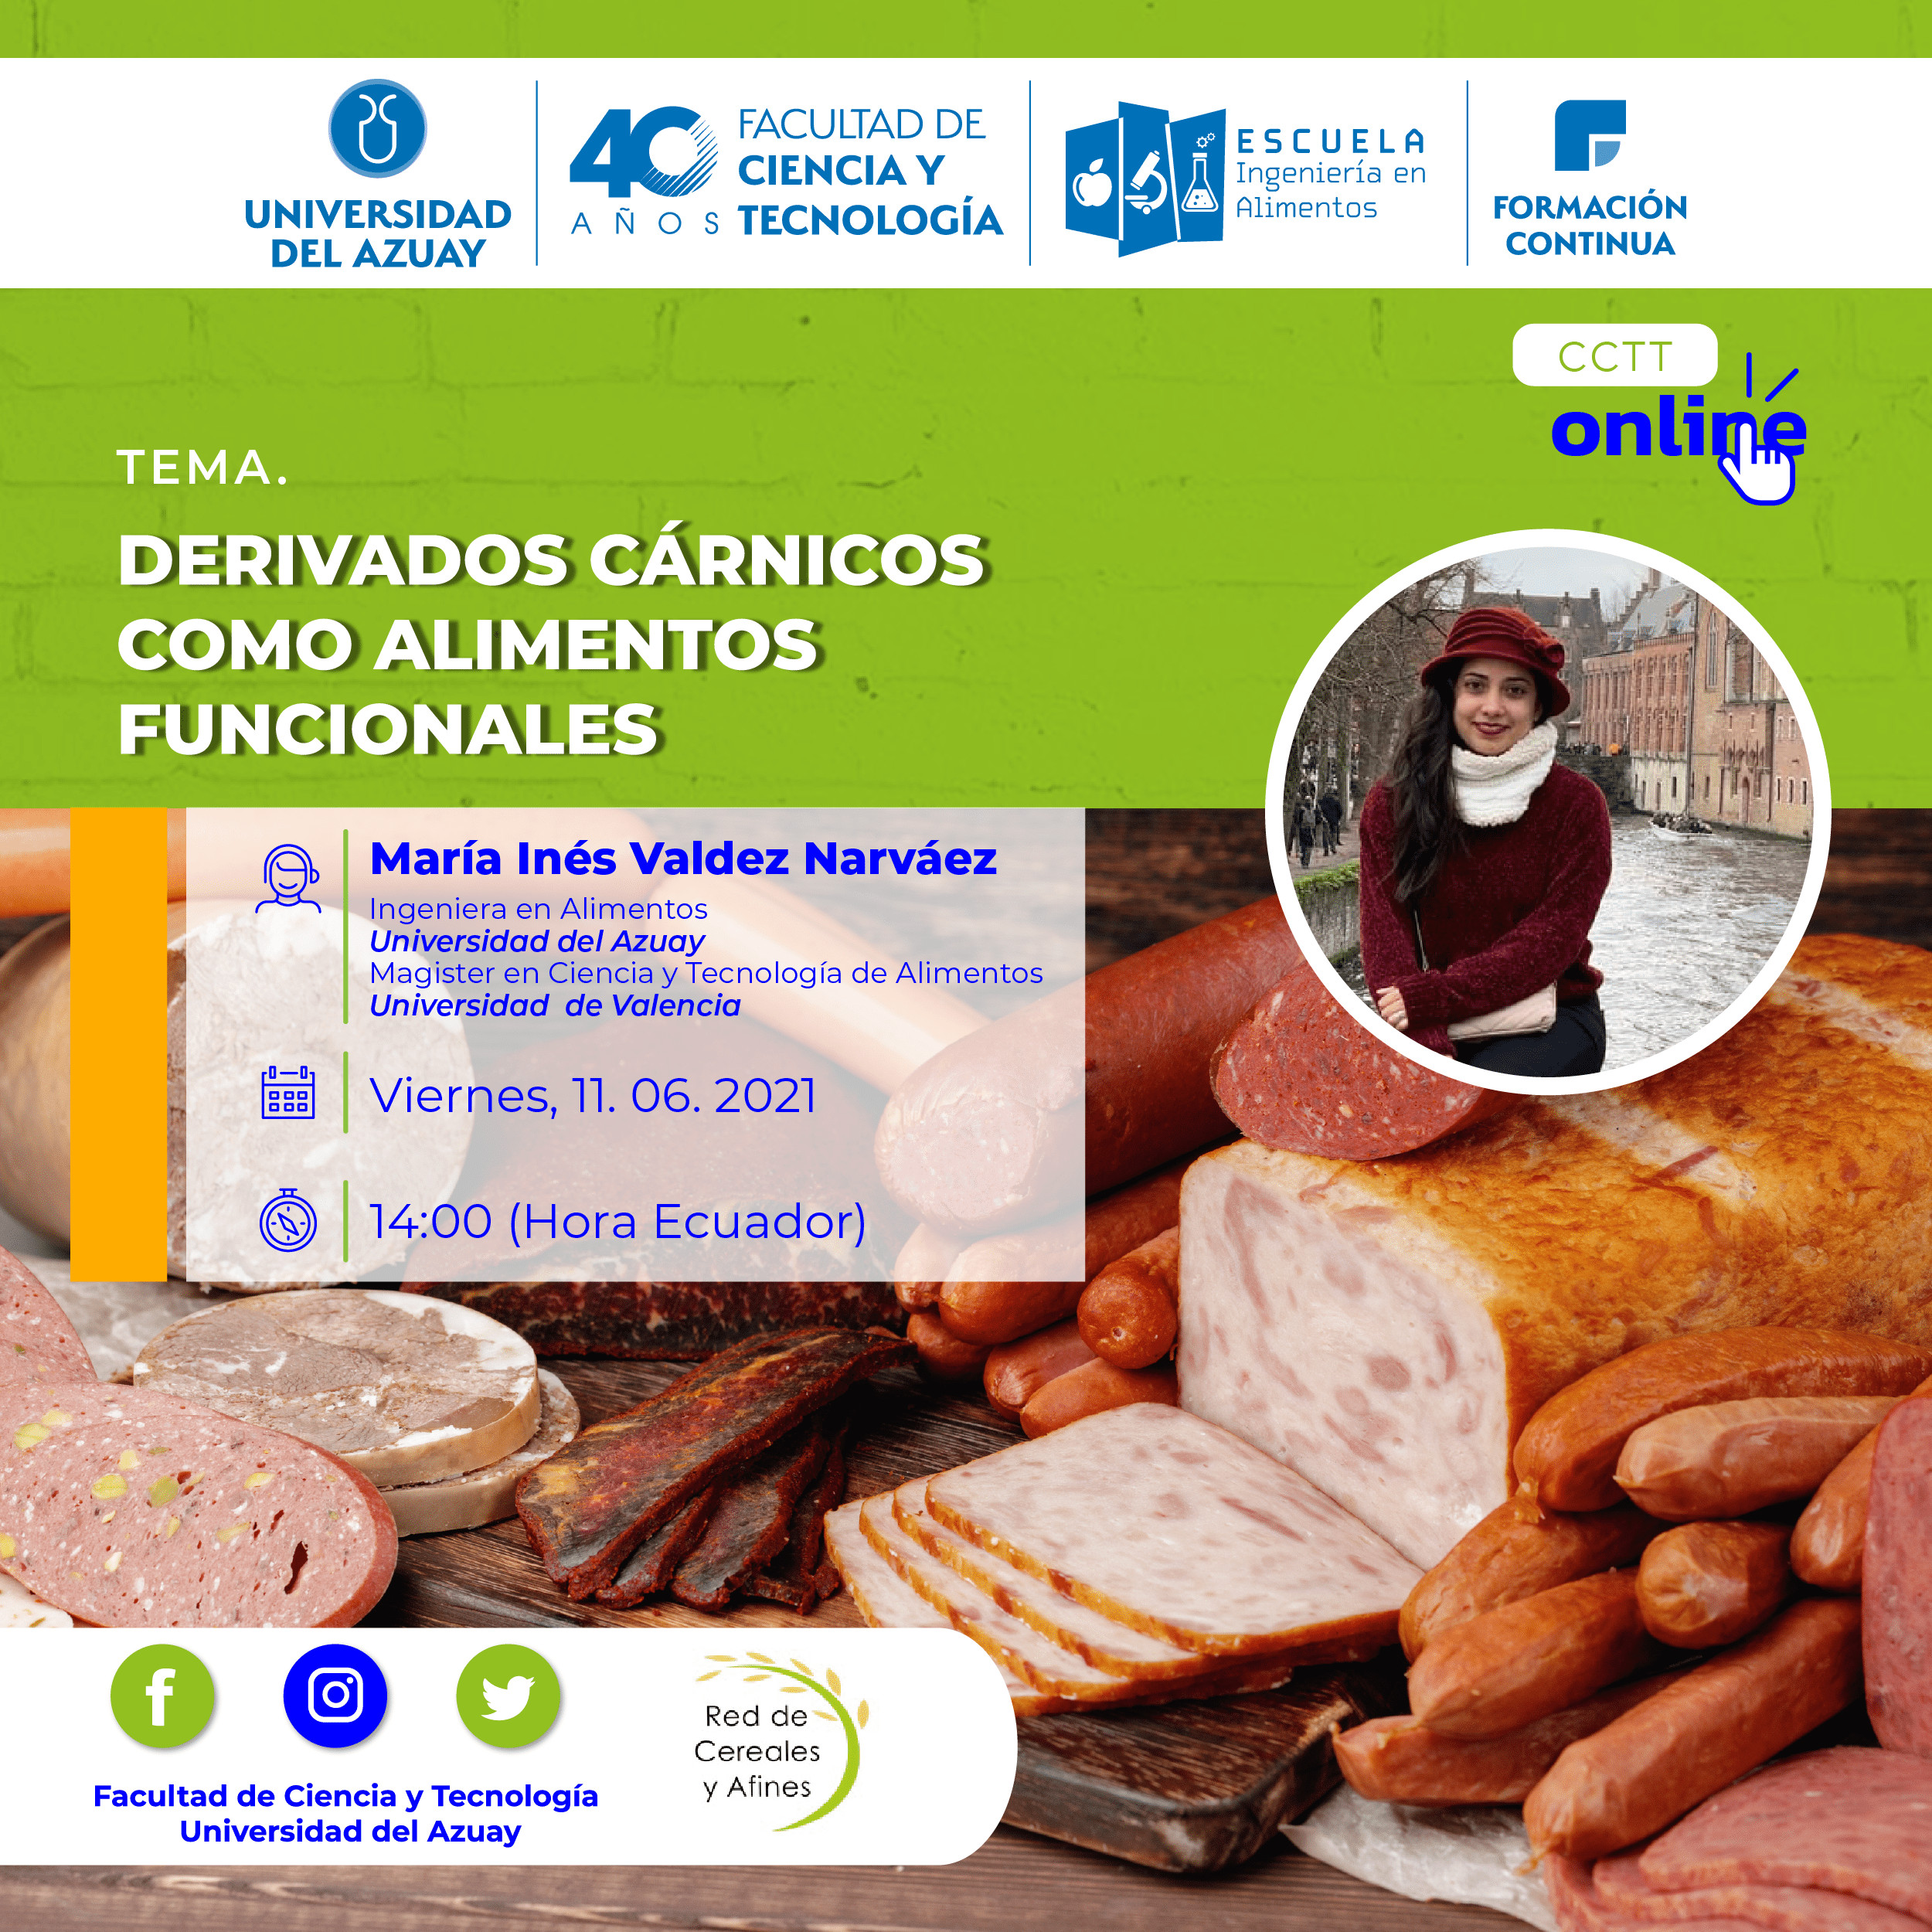 Conference on meat derivatives in Food Engineering